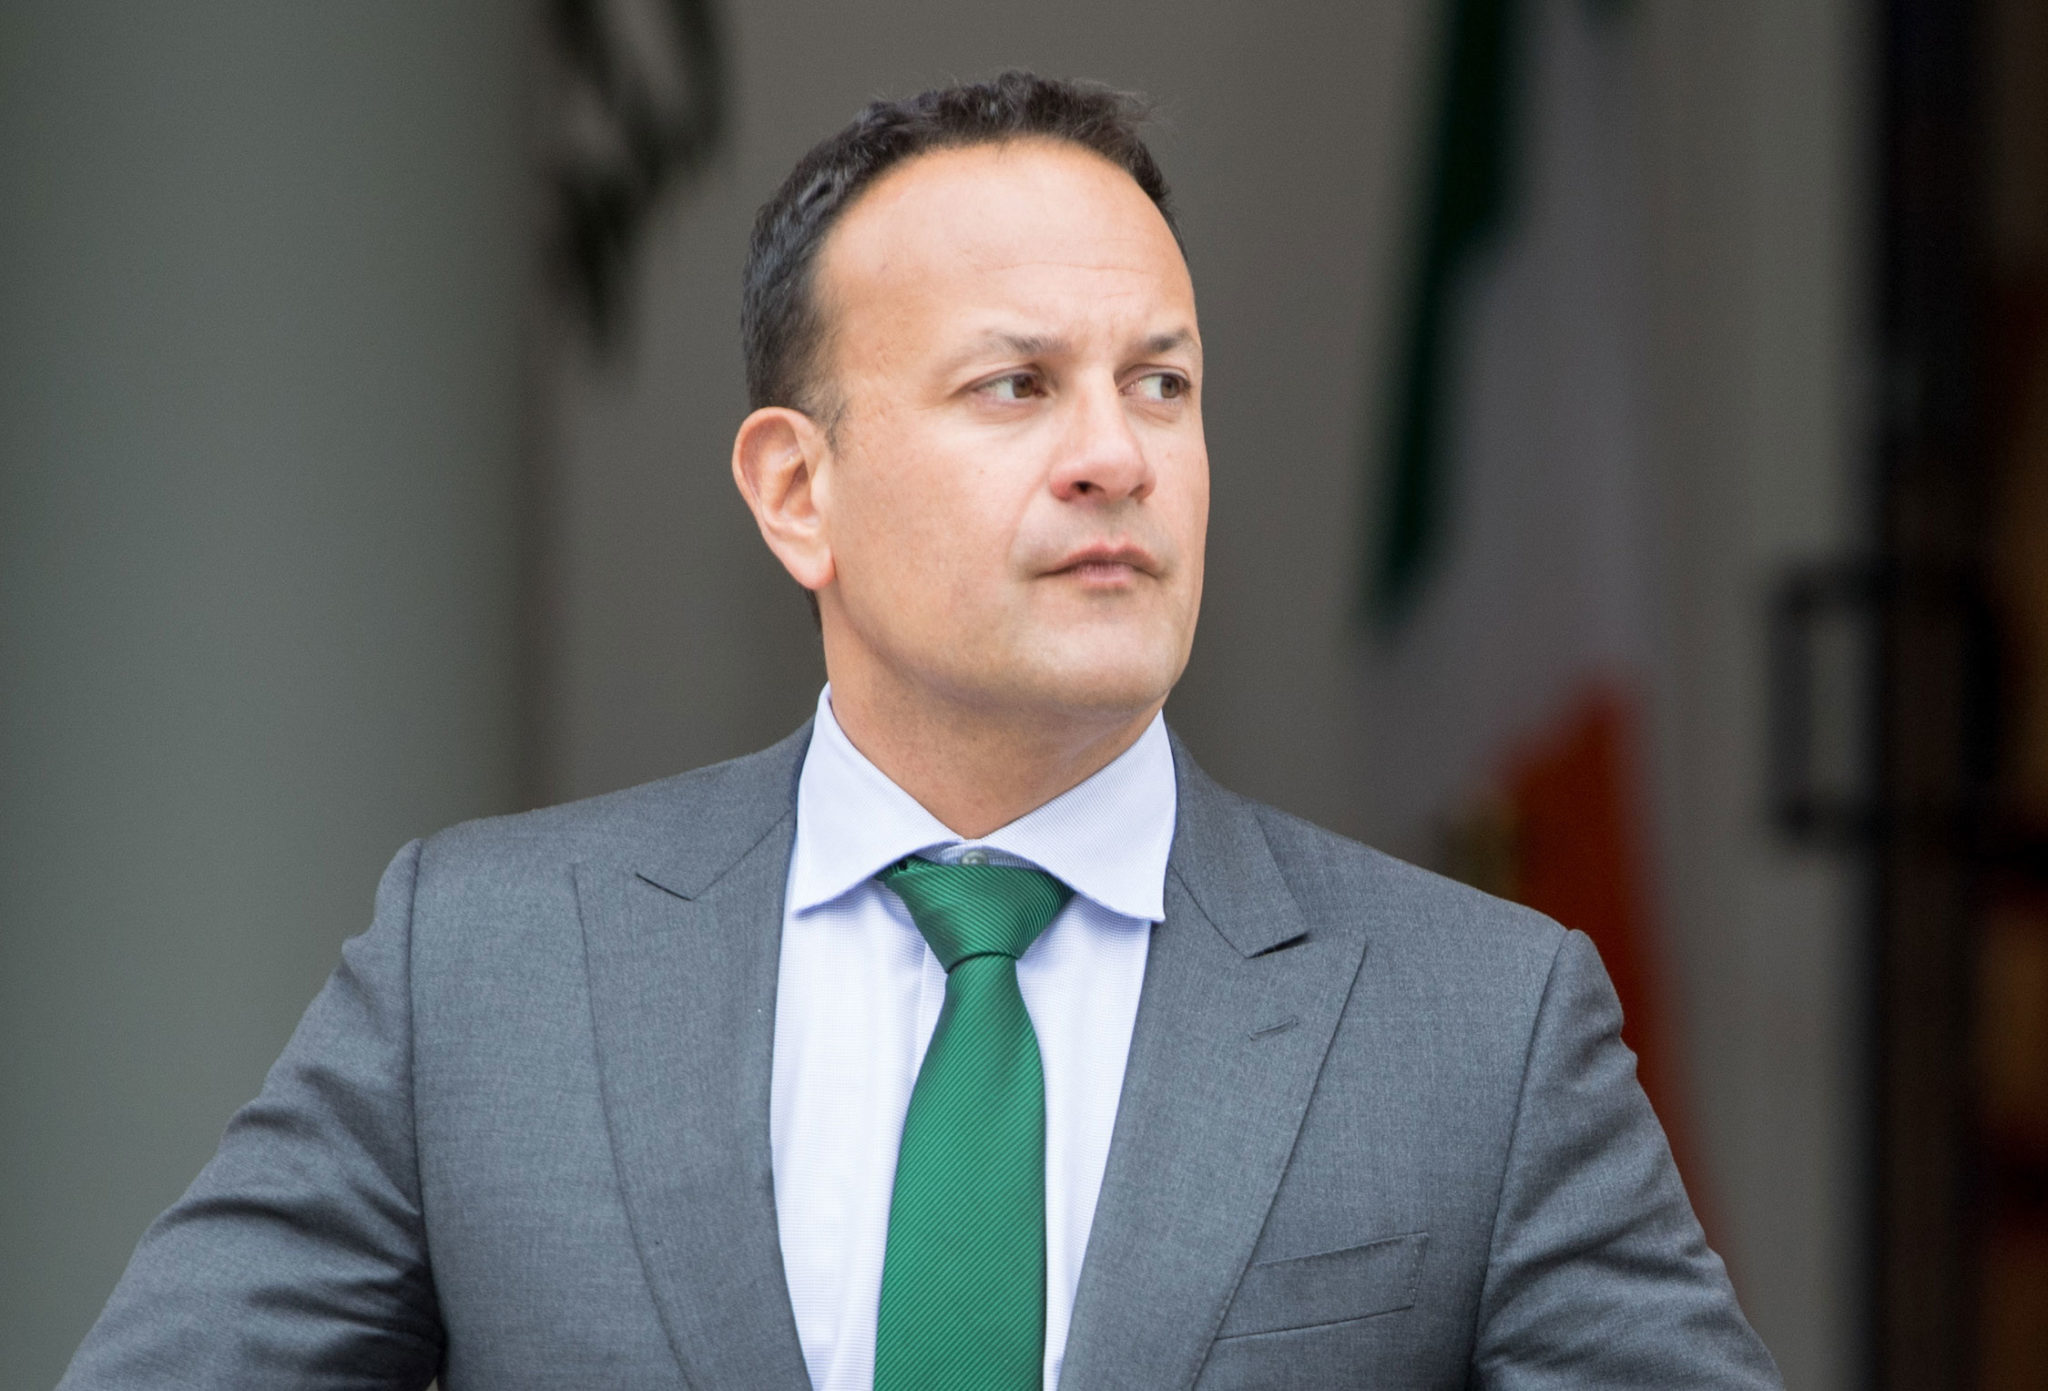 Evening top 5: Taoiseach says Ireland 'should be afraid of no-deal ...